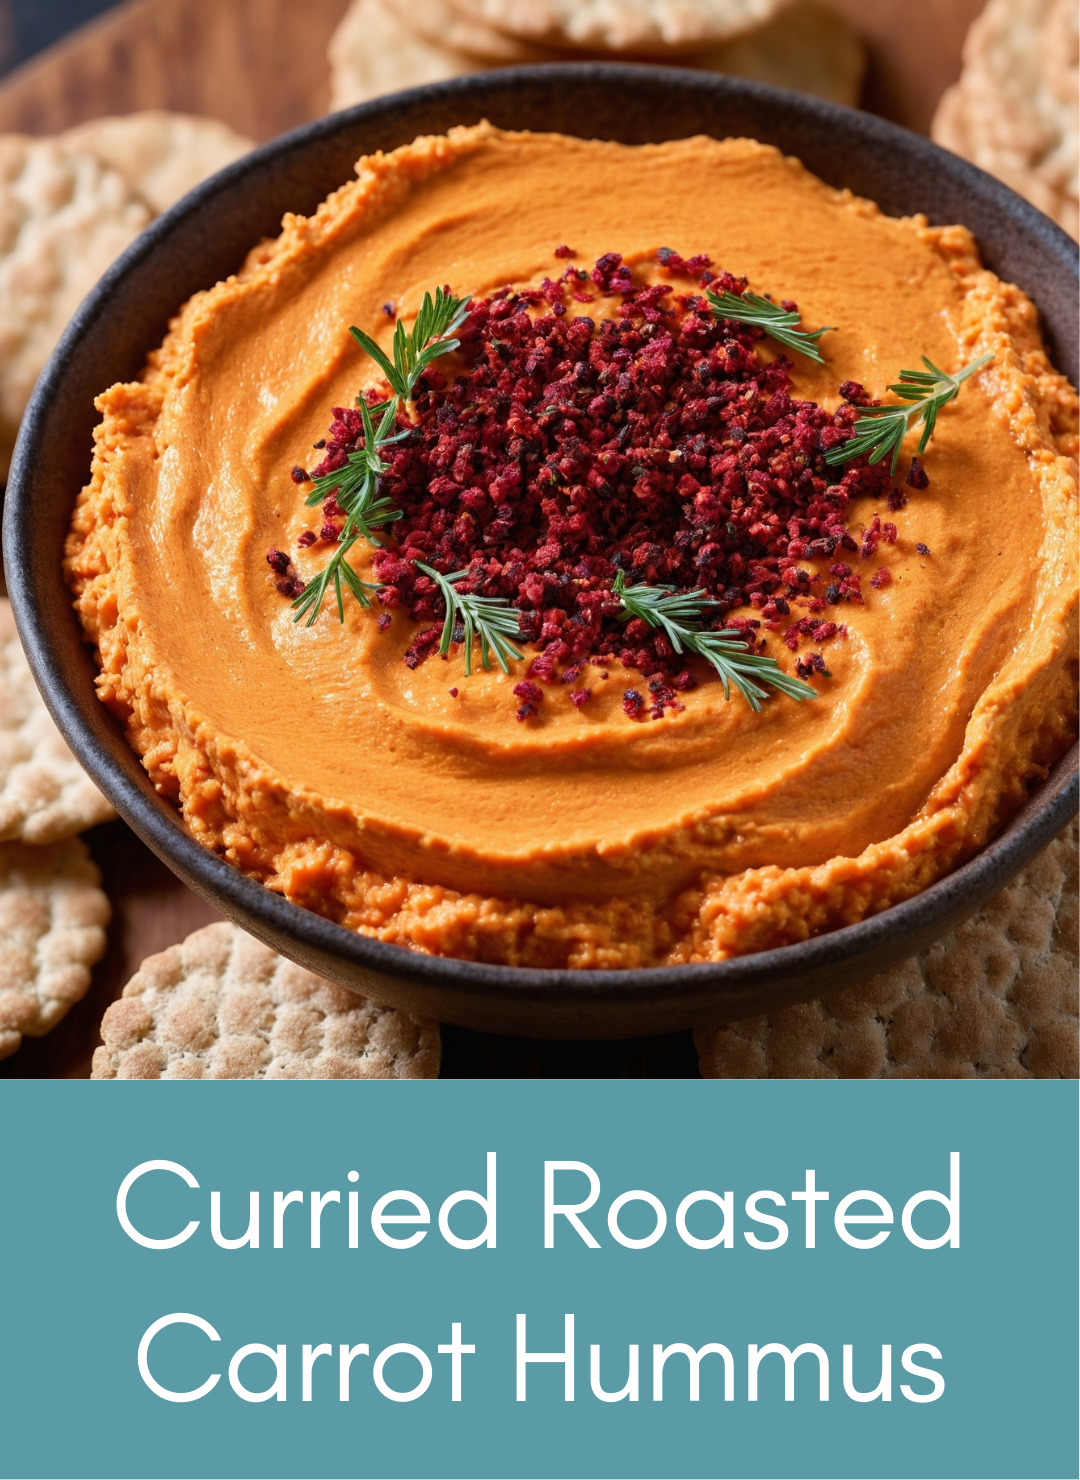 Curried Roasted Carrot Hummus Picture with link to recipe